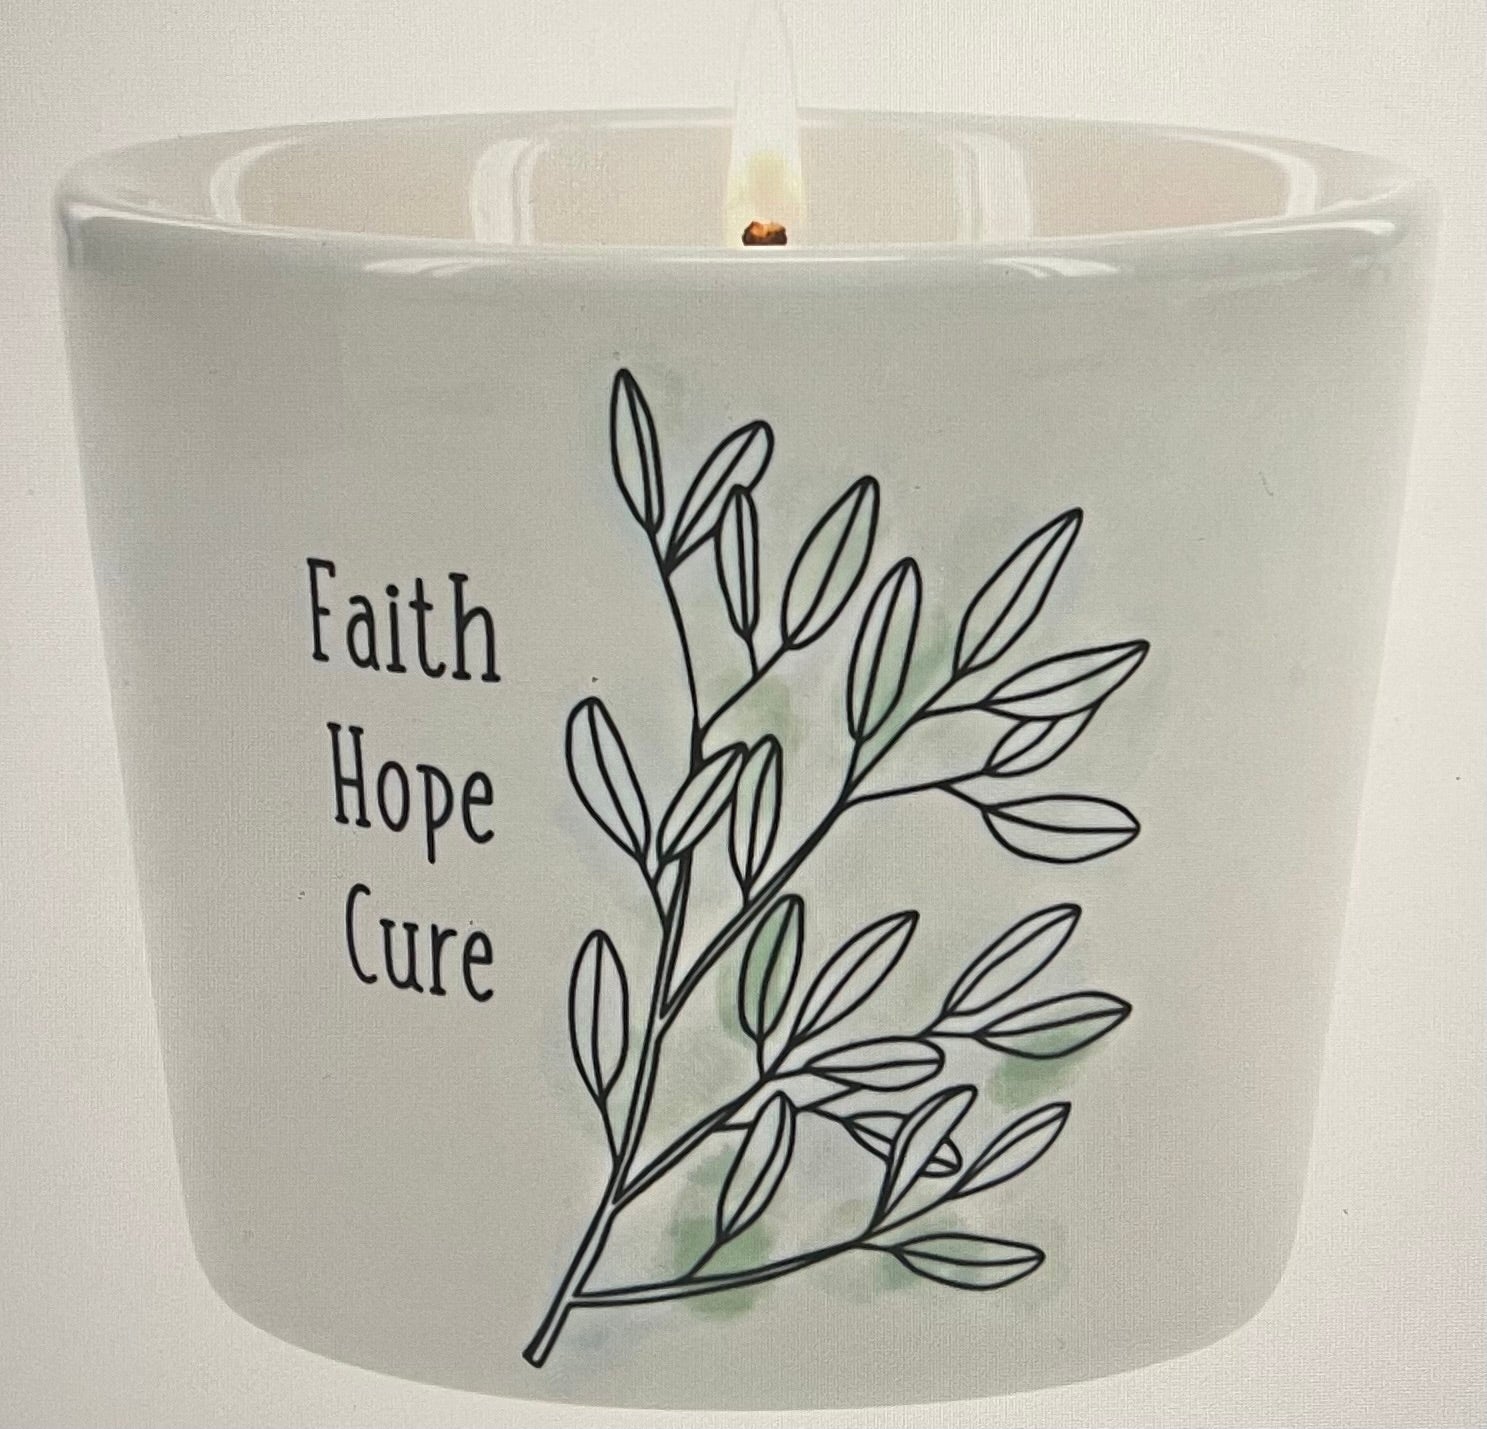 Faith Hope Cure - 8 oz - 100% Soy Wax Candle Scent: Tranquility